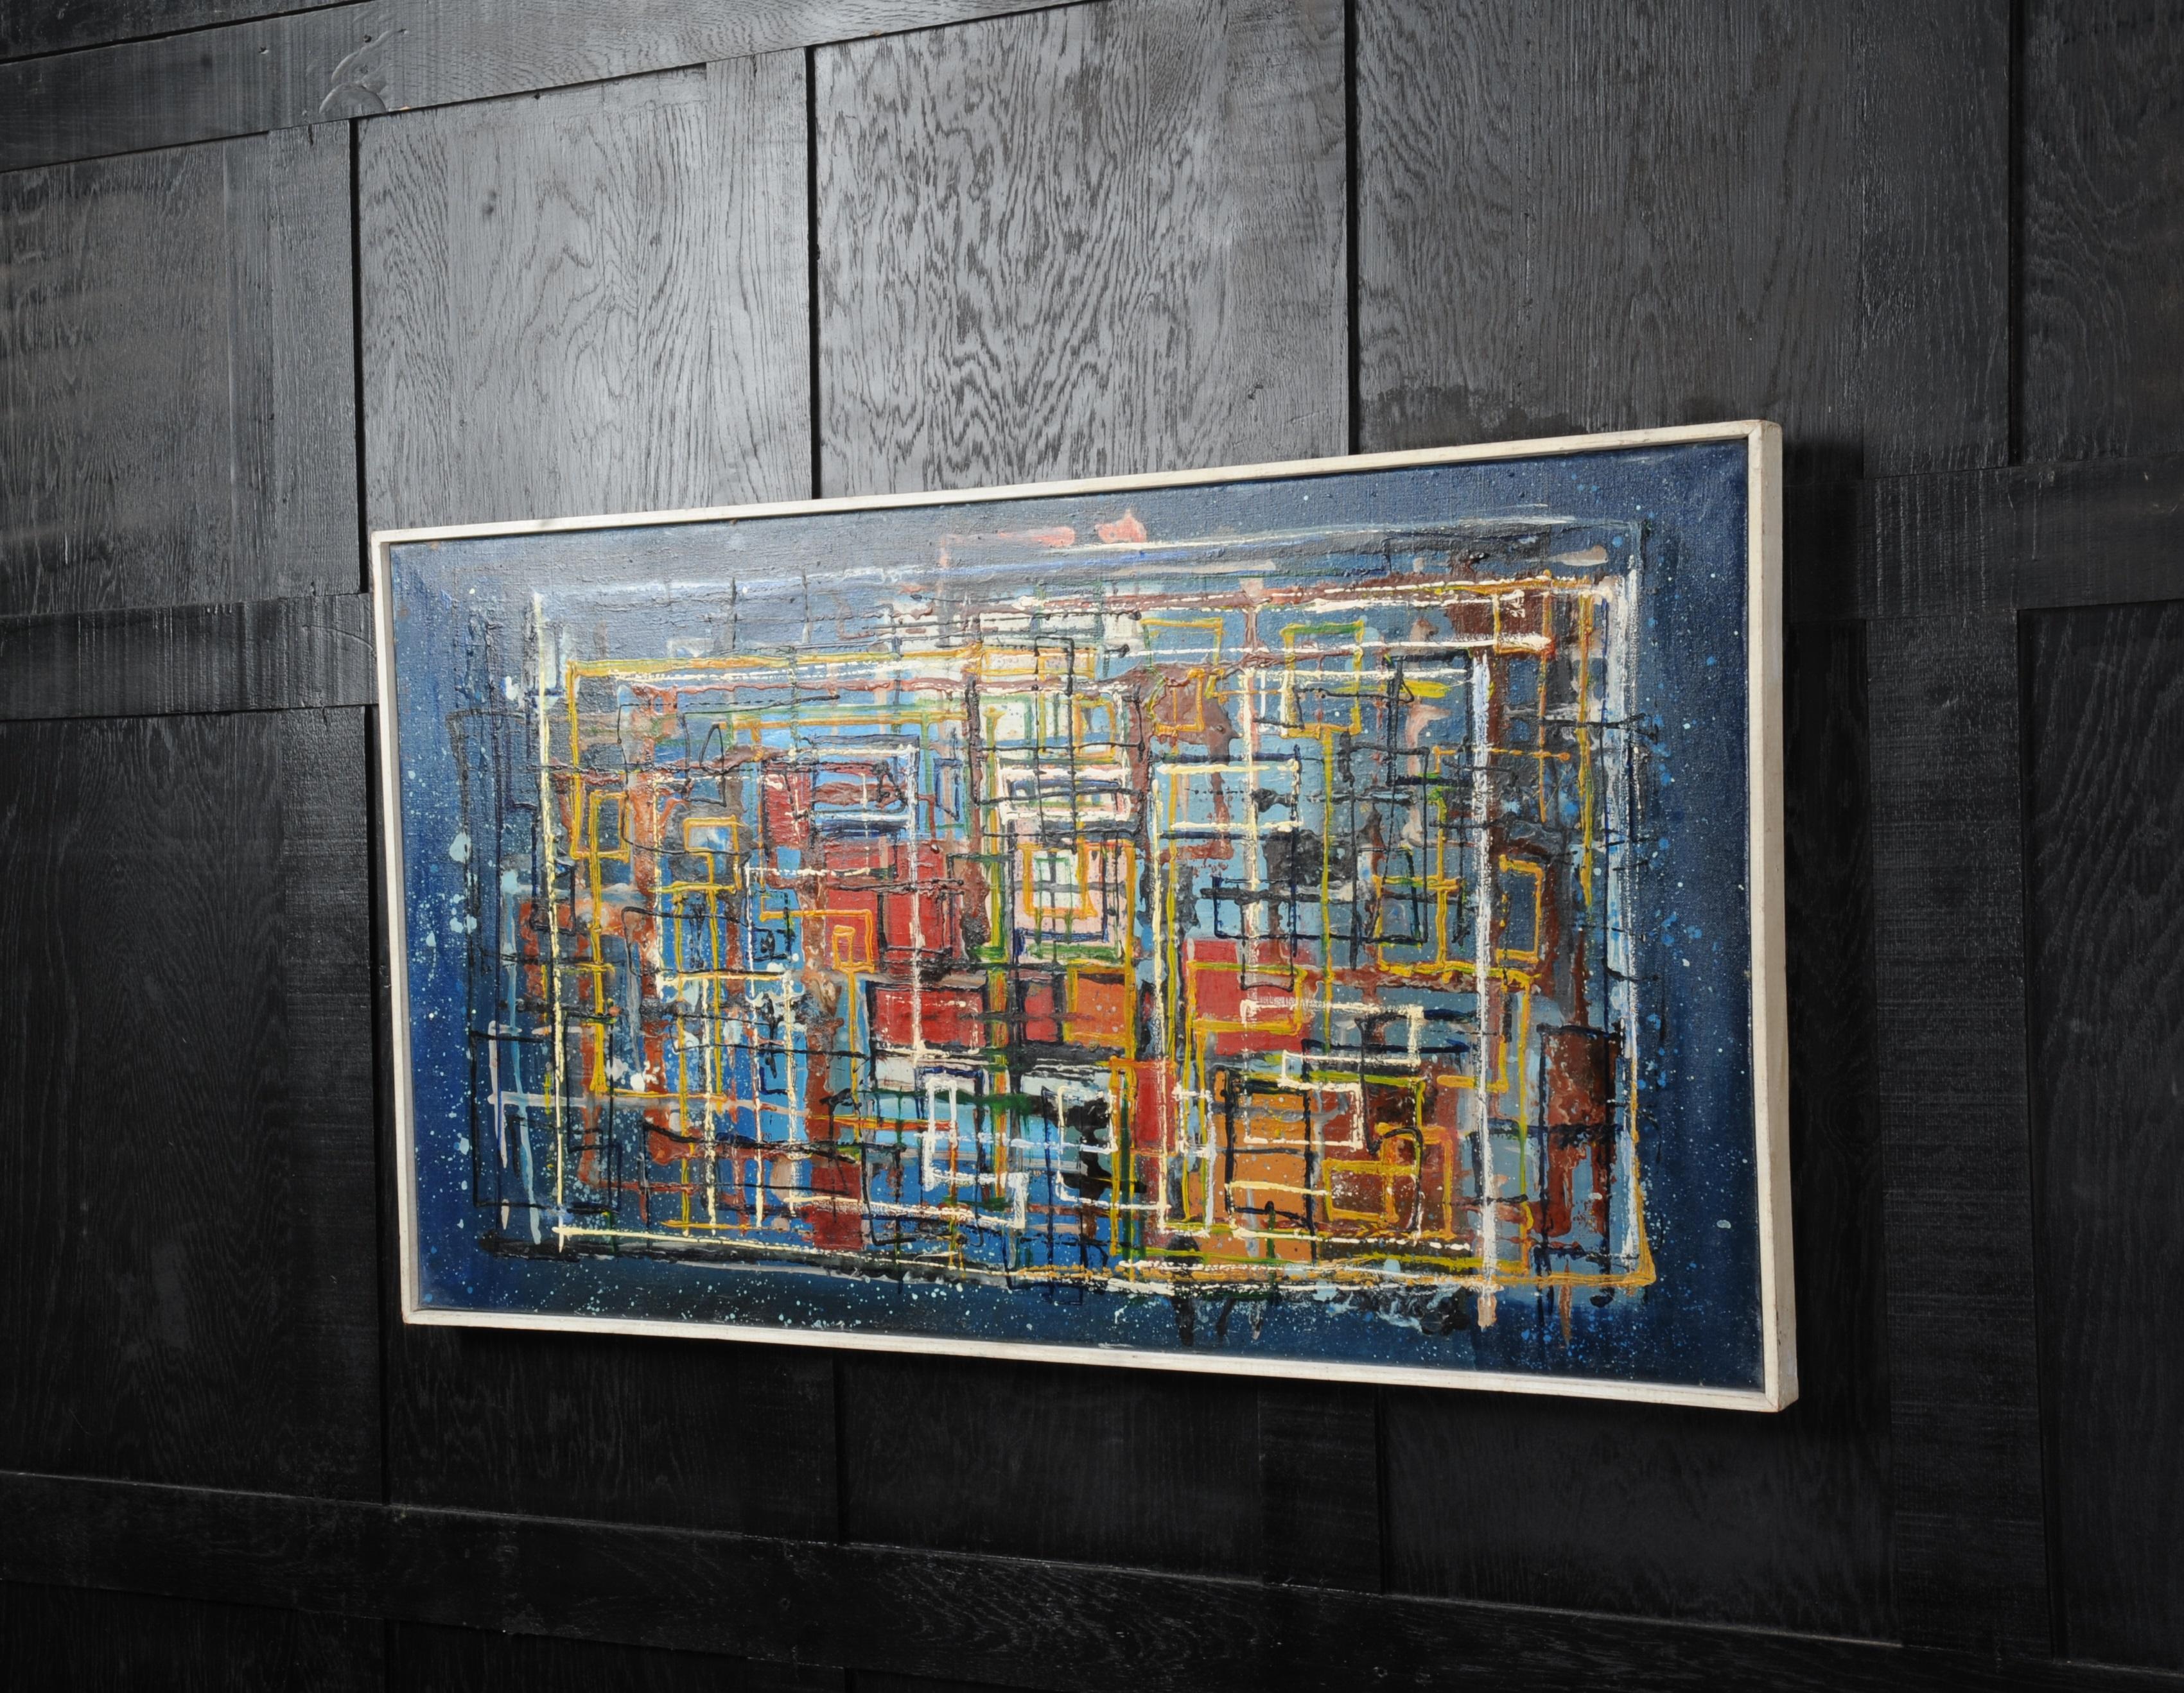 A stunning midcentury abstract oil on canvas by the listed artist William Ernst Burwell (1911-1974). It is in its original gallery frame of painted softwood. We have obtained several of the artists works from his studio. Condition is very good, the